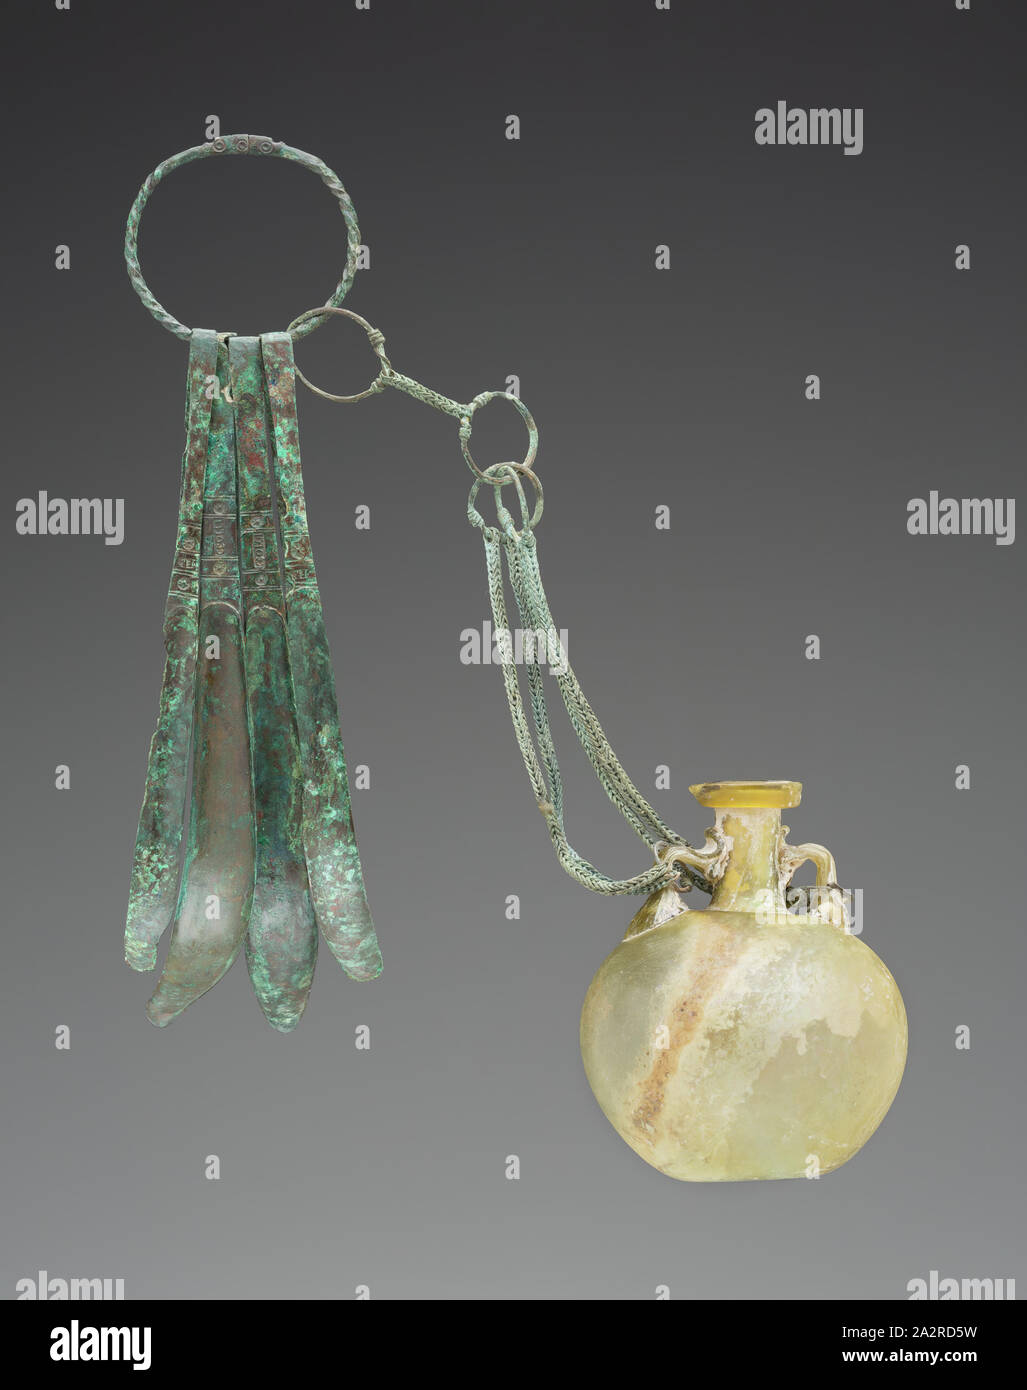 Roman, Oil Bottle with Bronze Chain attached to Ring with Strigils, between 1st and 2nd century CE, glass and bronze, various dimensions Stock Photo